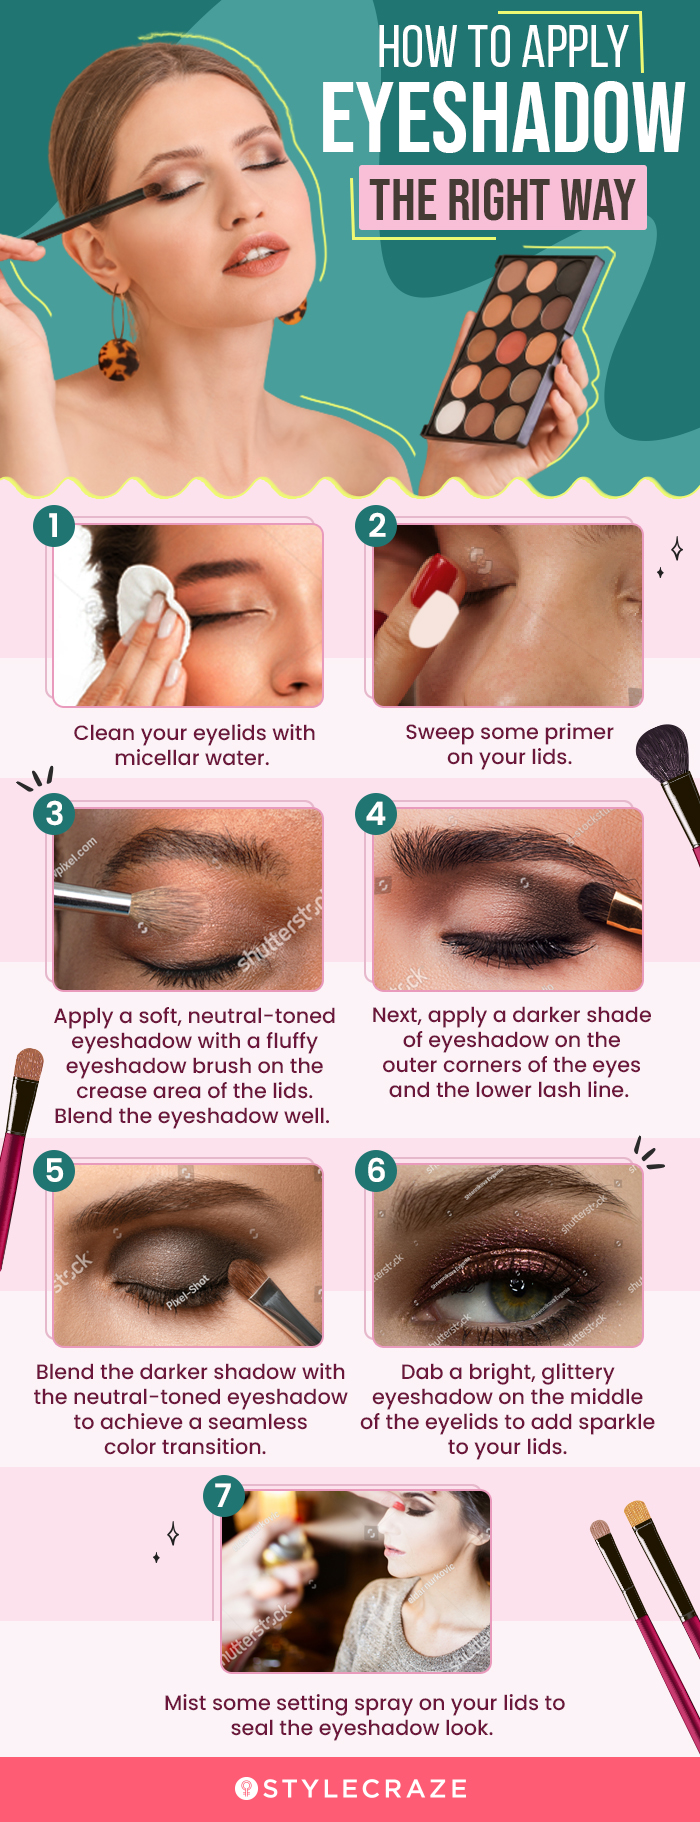 How To Apply Eyeshadow The Right Way (infographic)